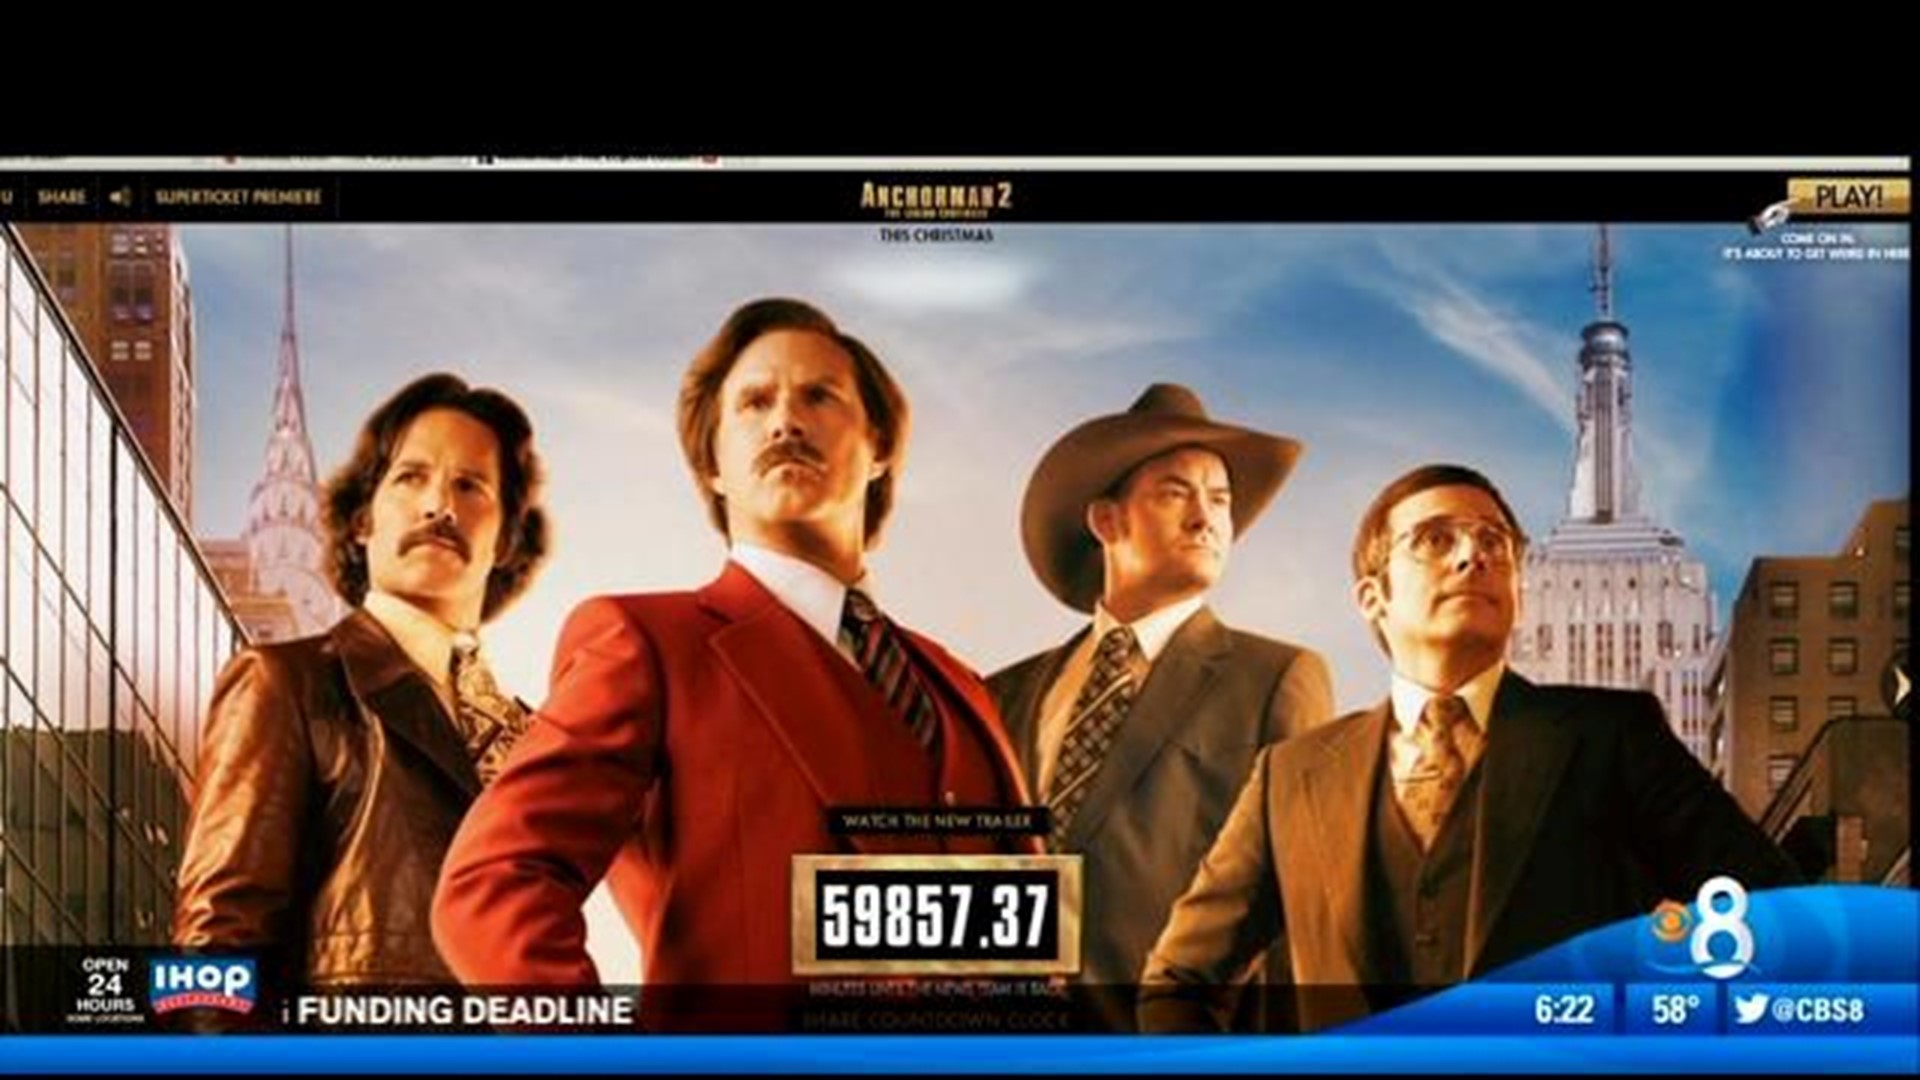 Anchorman' Inspired by Lifetime Documentary